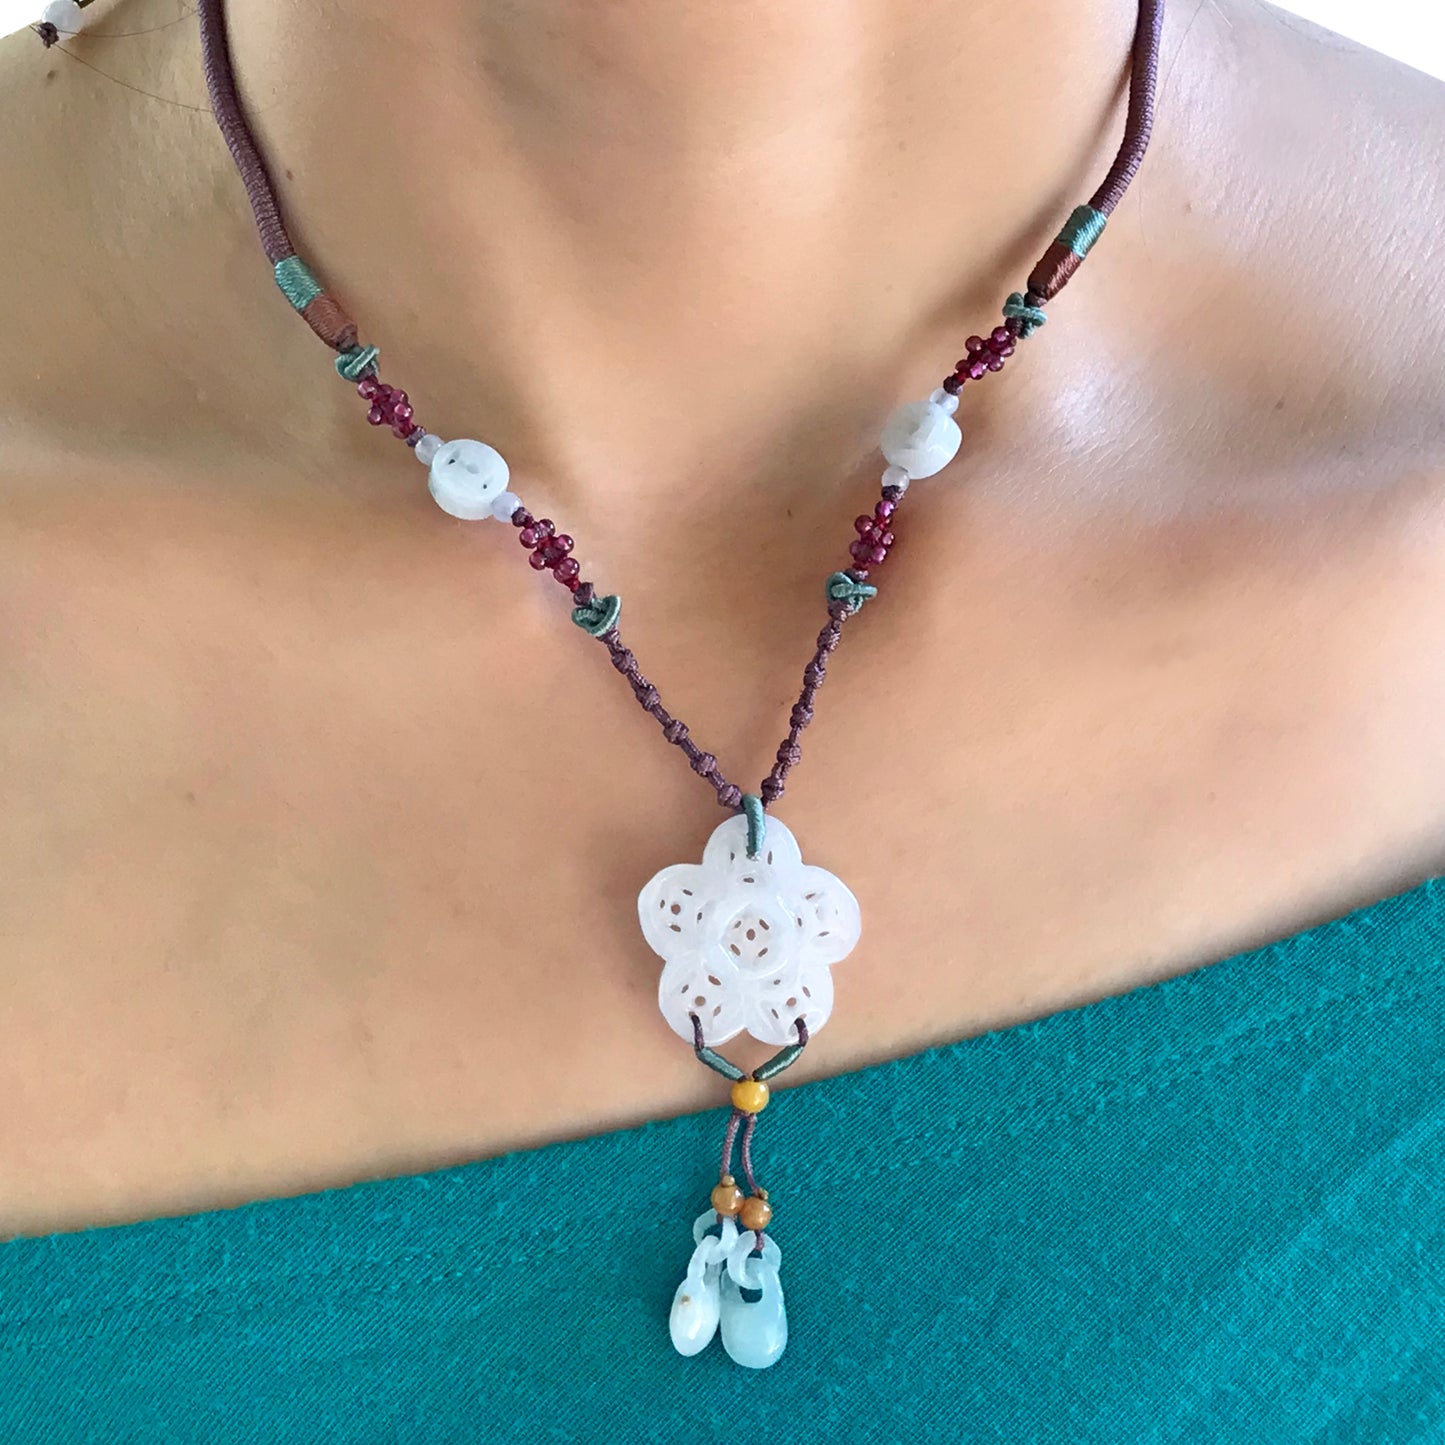 Look Graceful with the Queen Anne Lace Flower Necklace